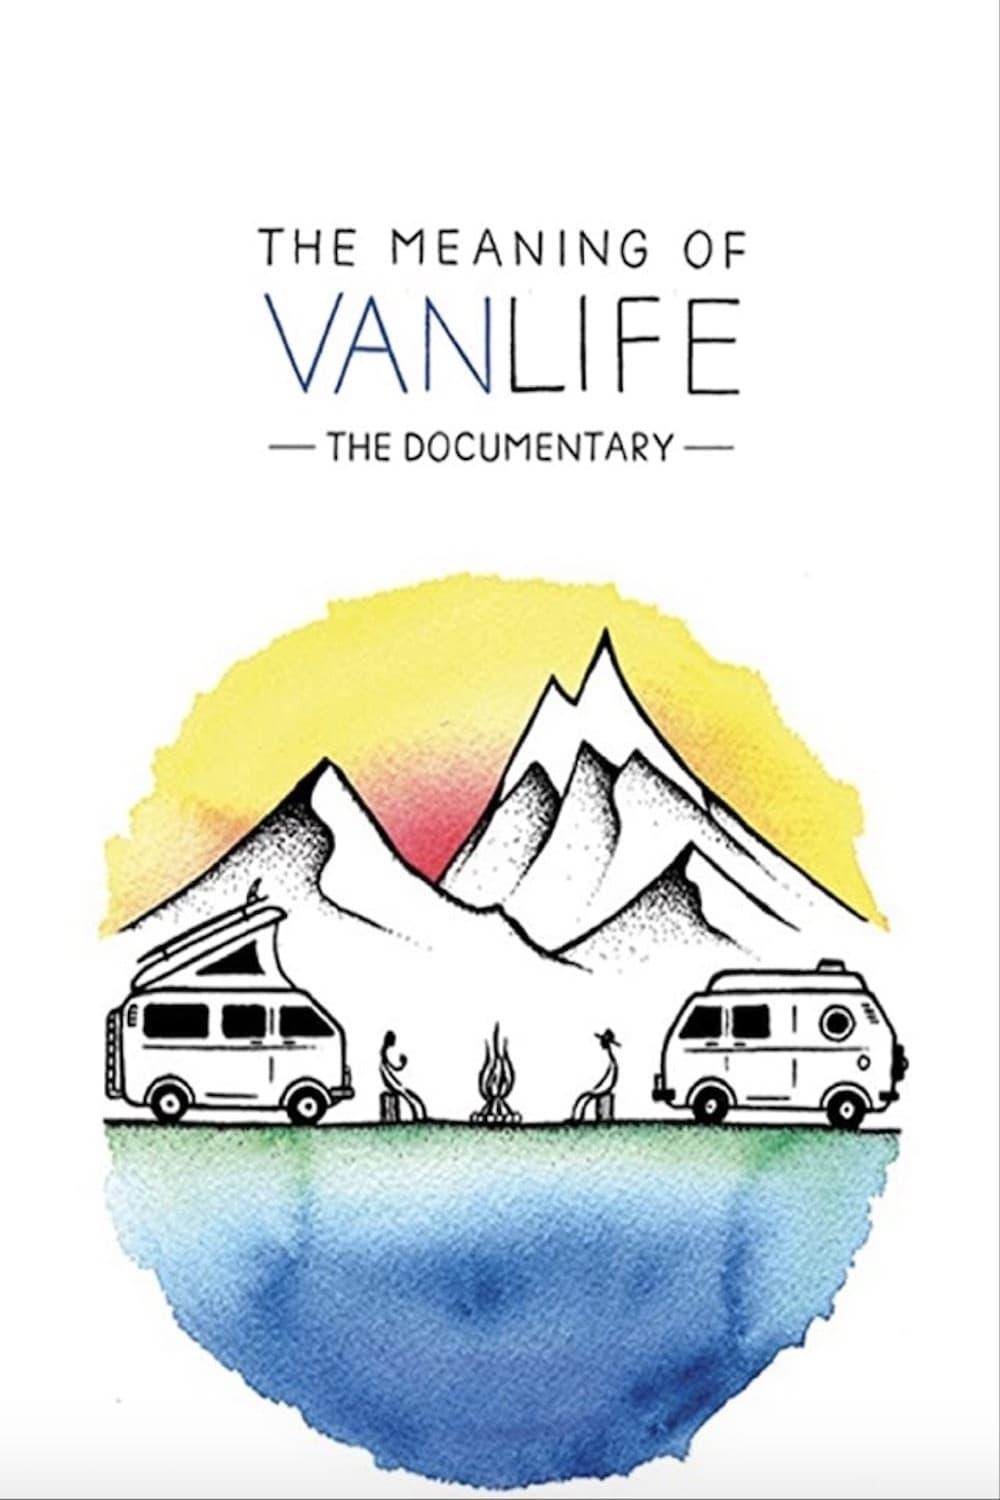 The Meaning of Vanlife poster